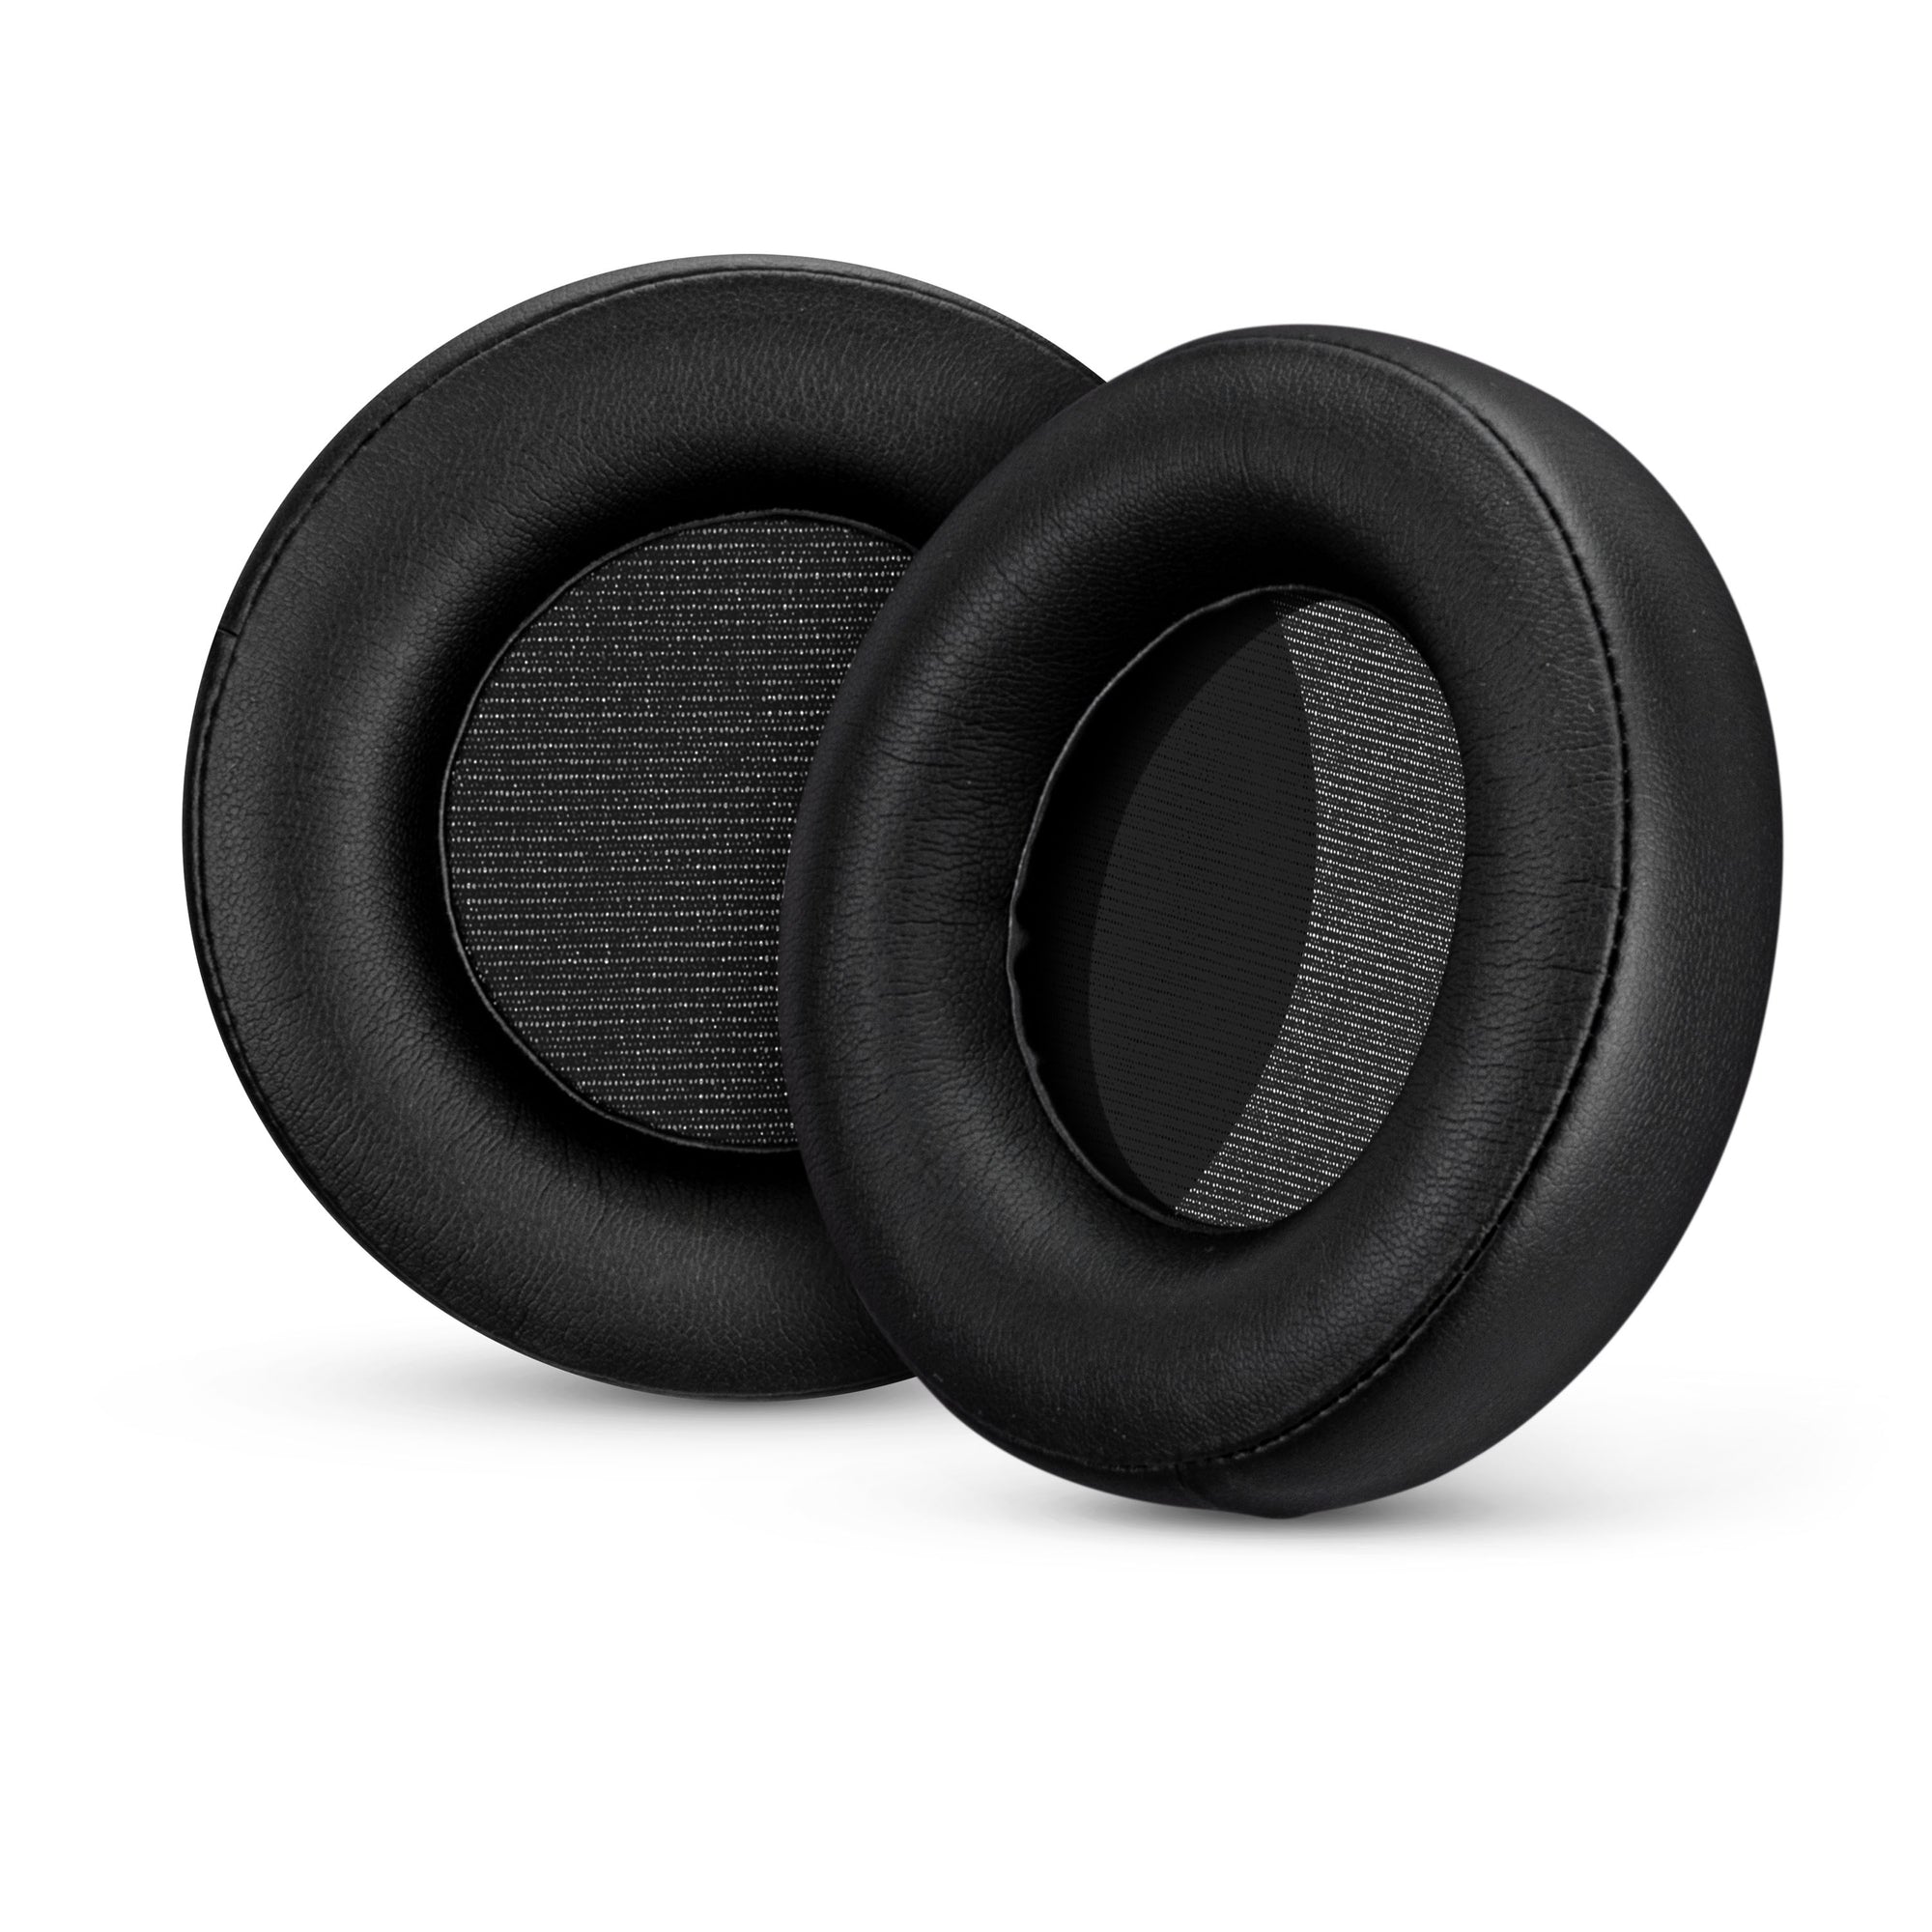 Replacement Earpads for Corsair Virtuoso RGB Gaming Headset (Wireless/XT/SE), Soft PU Leather & Extra Comfort